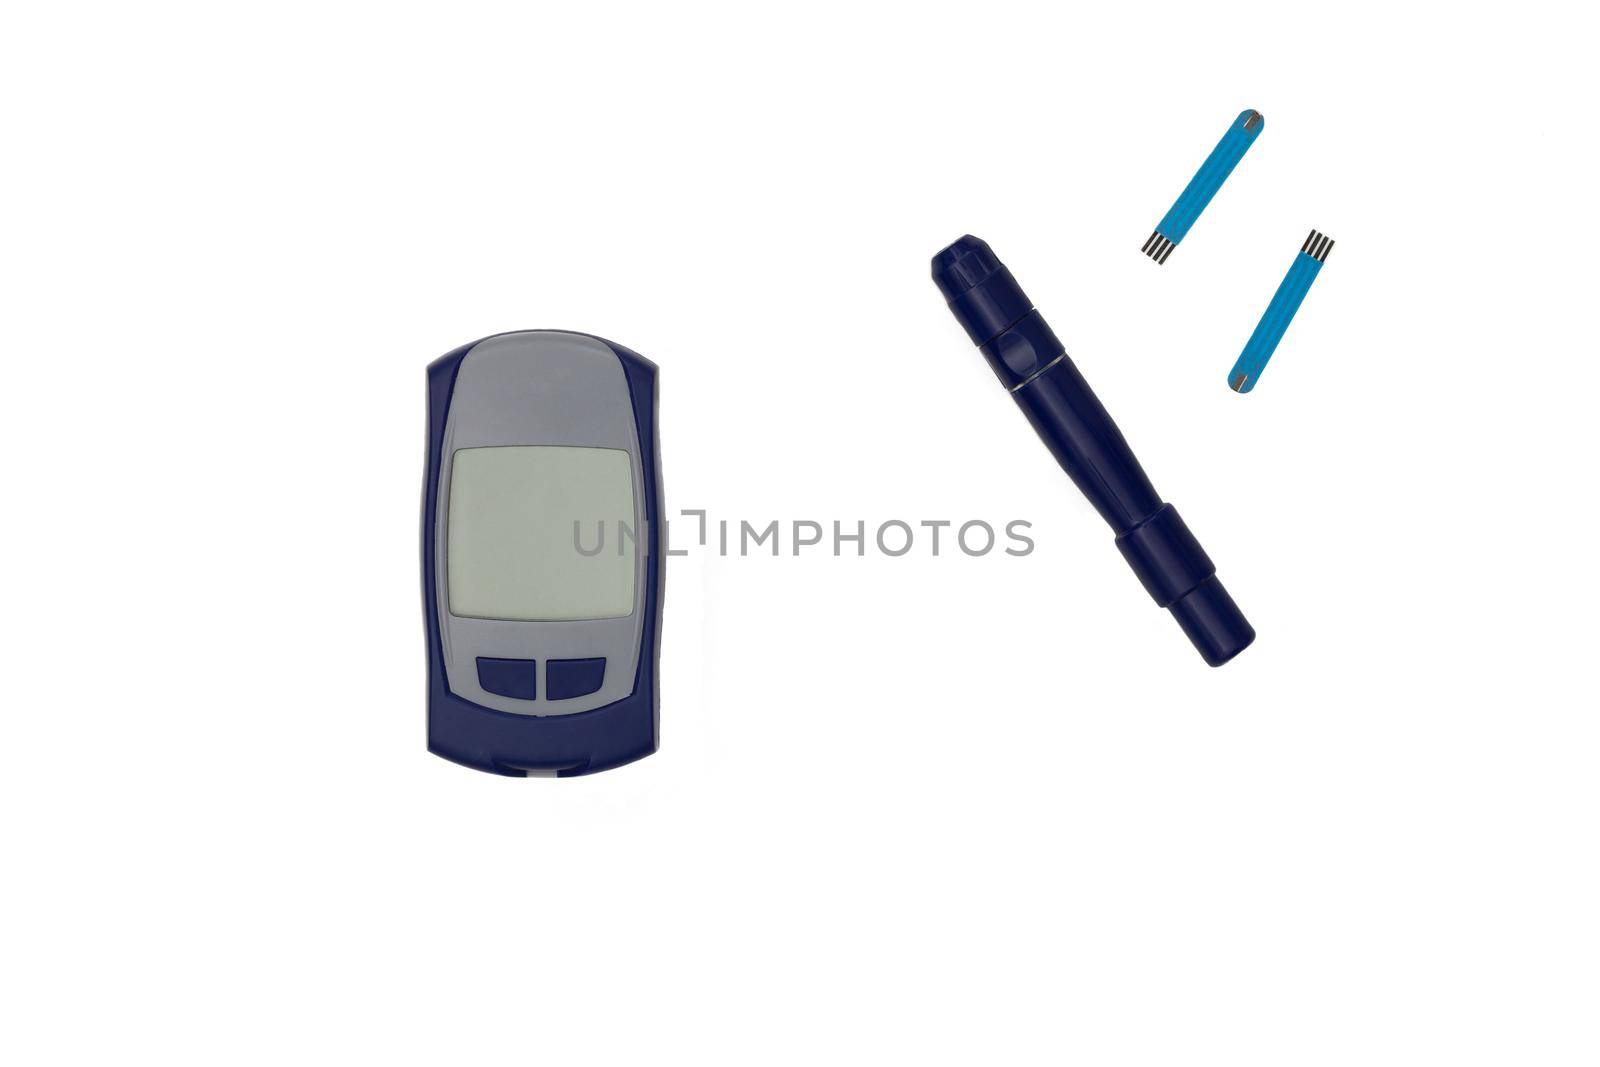 Isolated glucometer lancet and test strips by TatianaFoxy